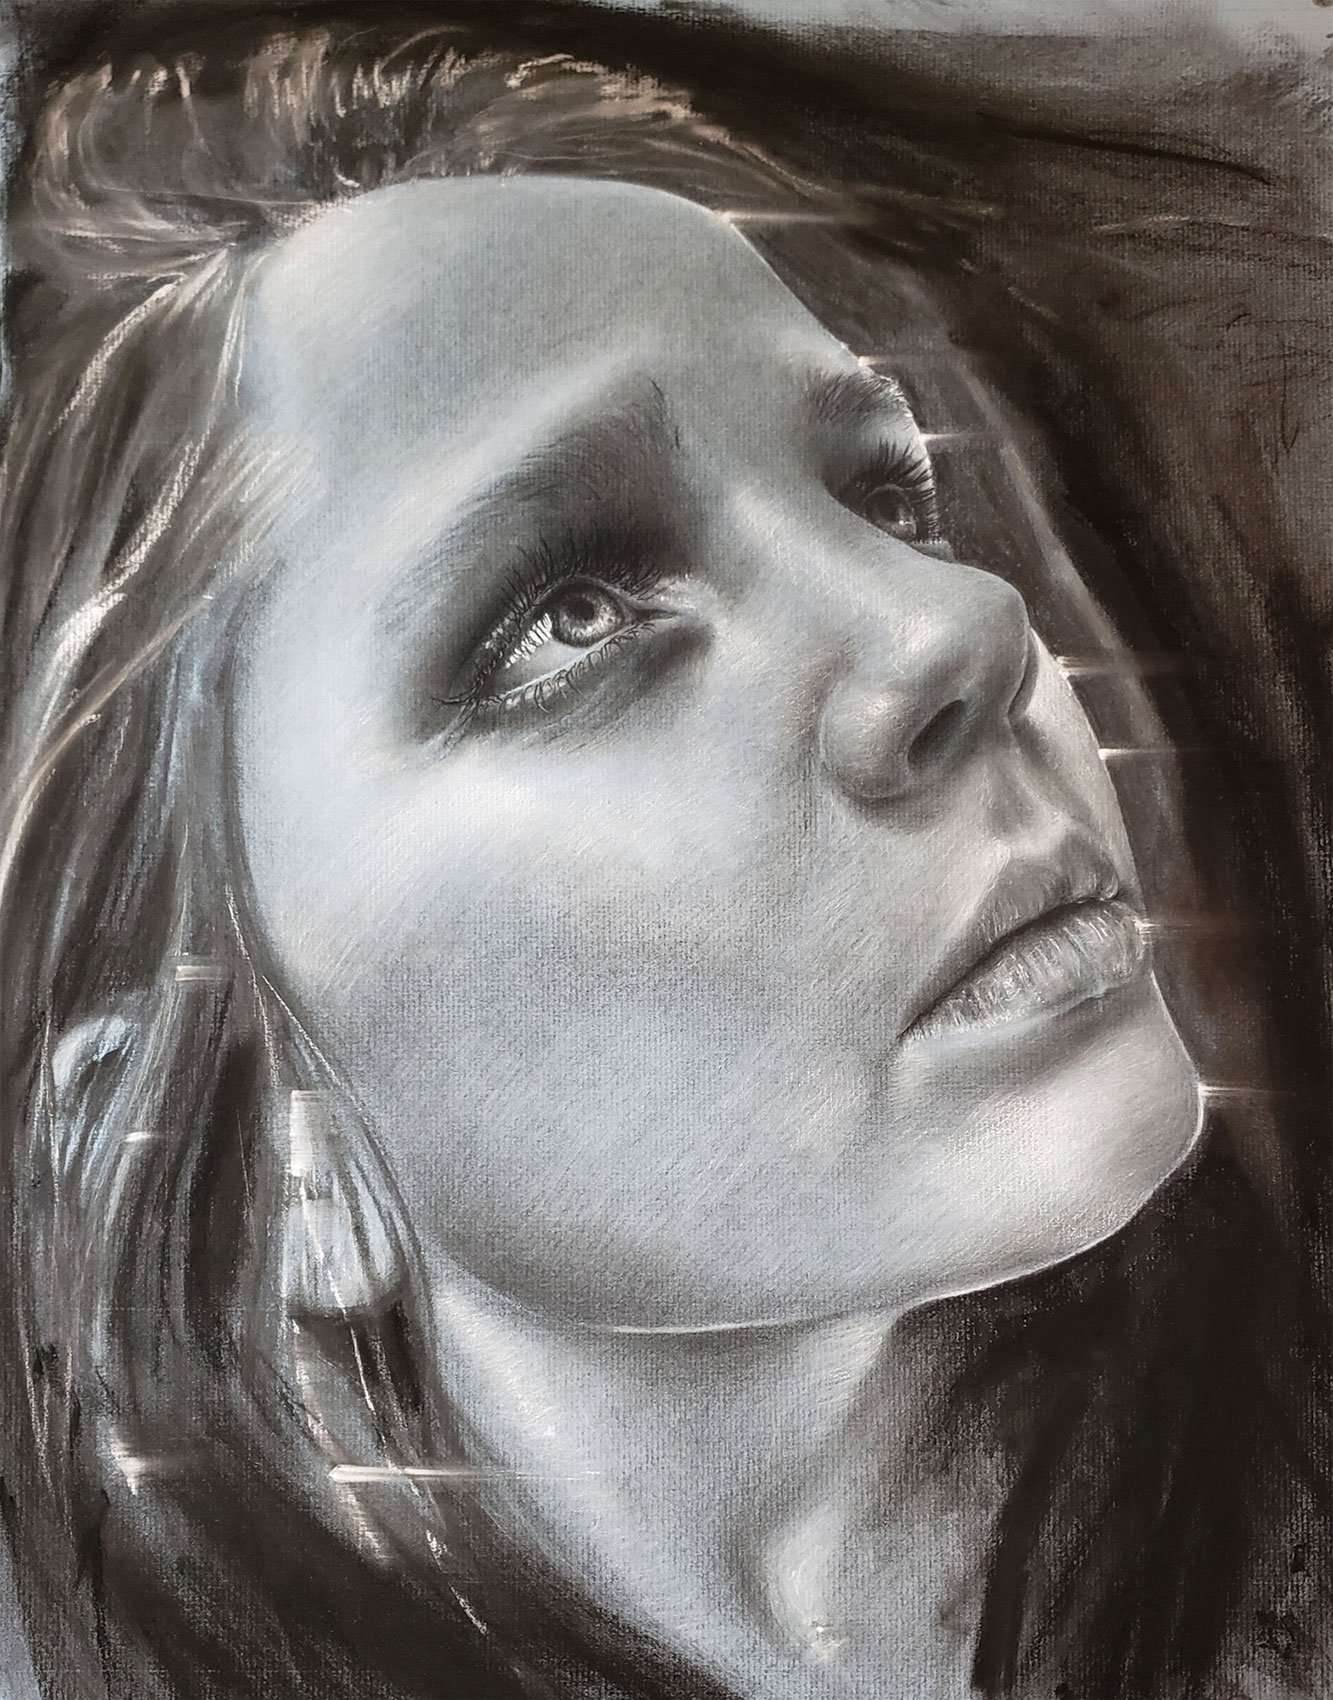    Liminality  , 24” x 18”, charcoal on paper 